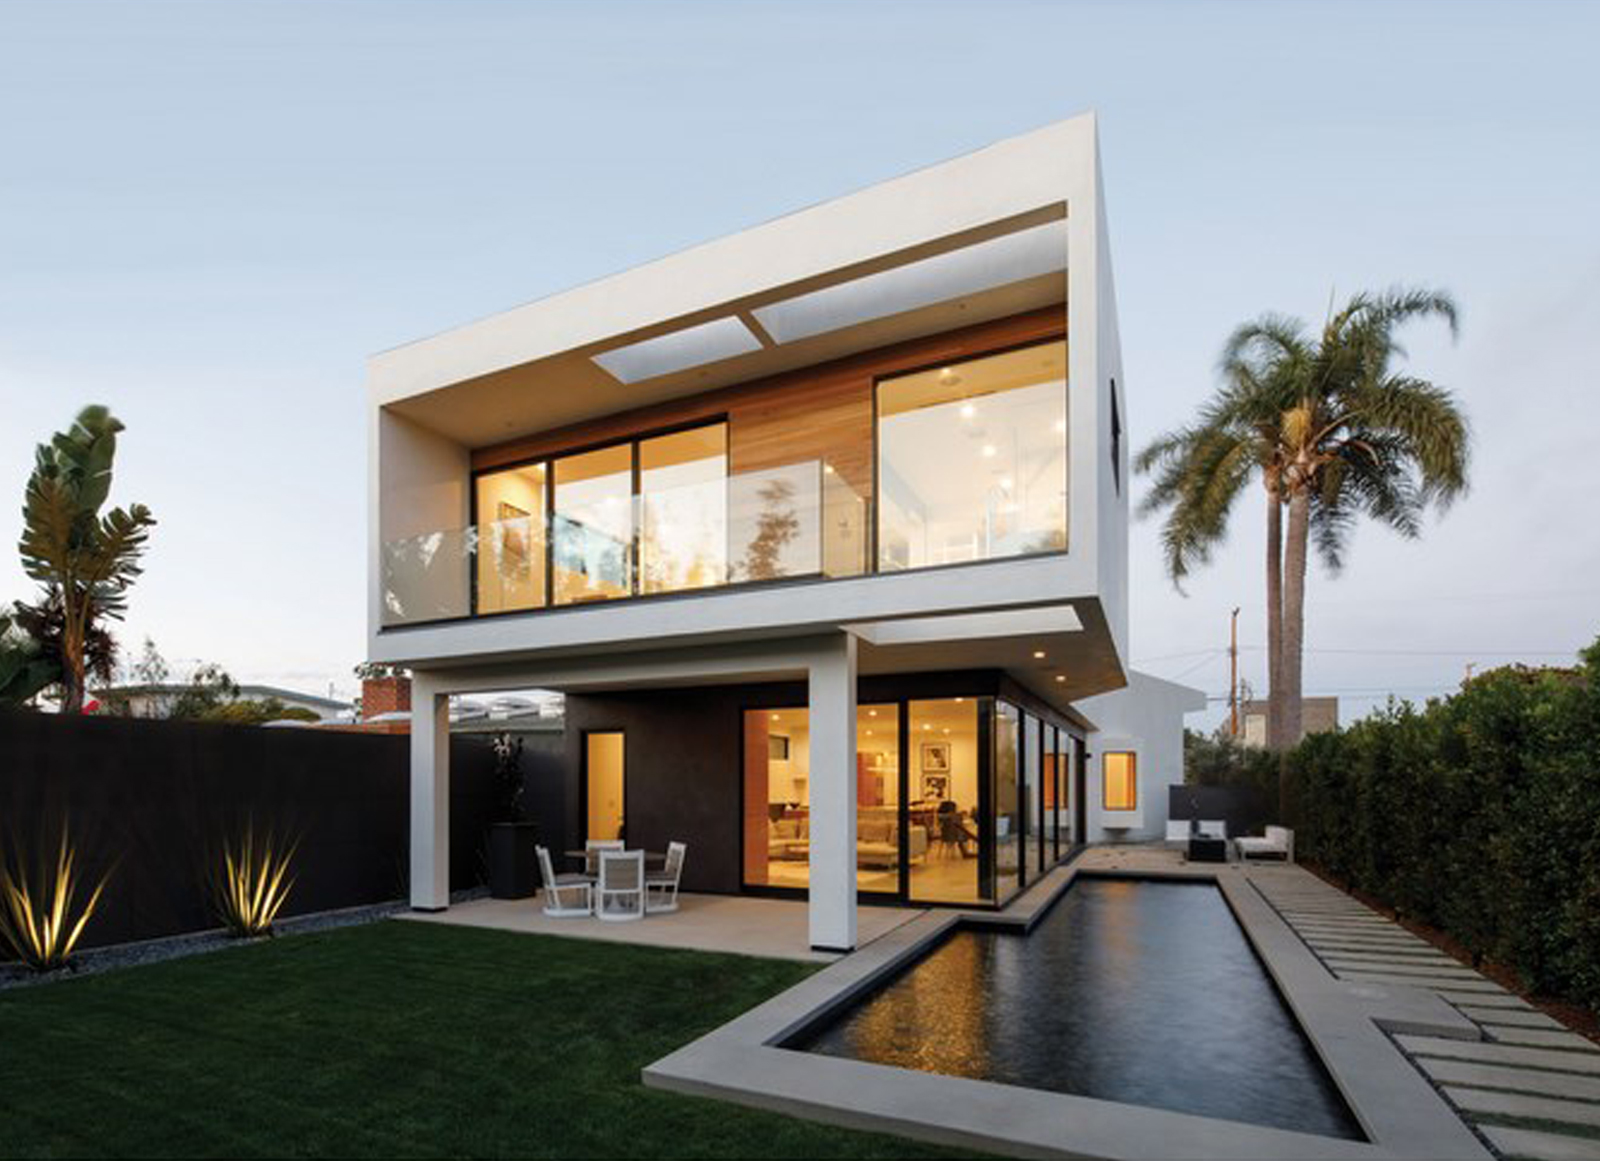 Venice Beach House by Griffin Enright Architects | International Residential Architecture Awards 2019